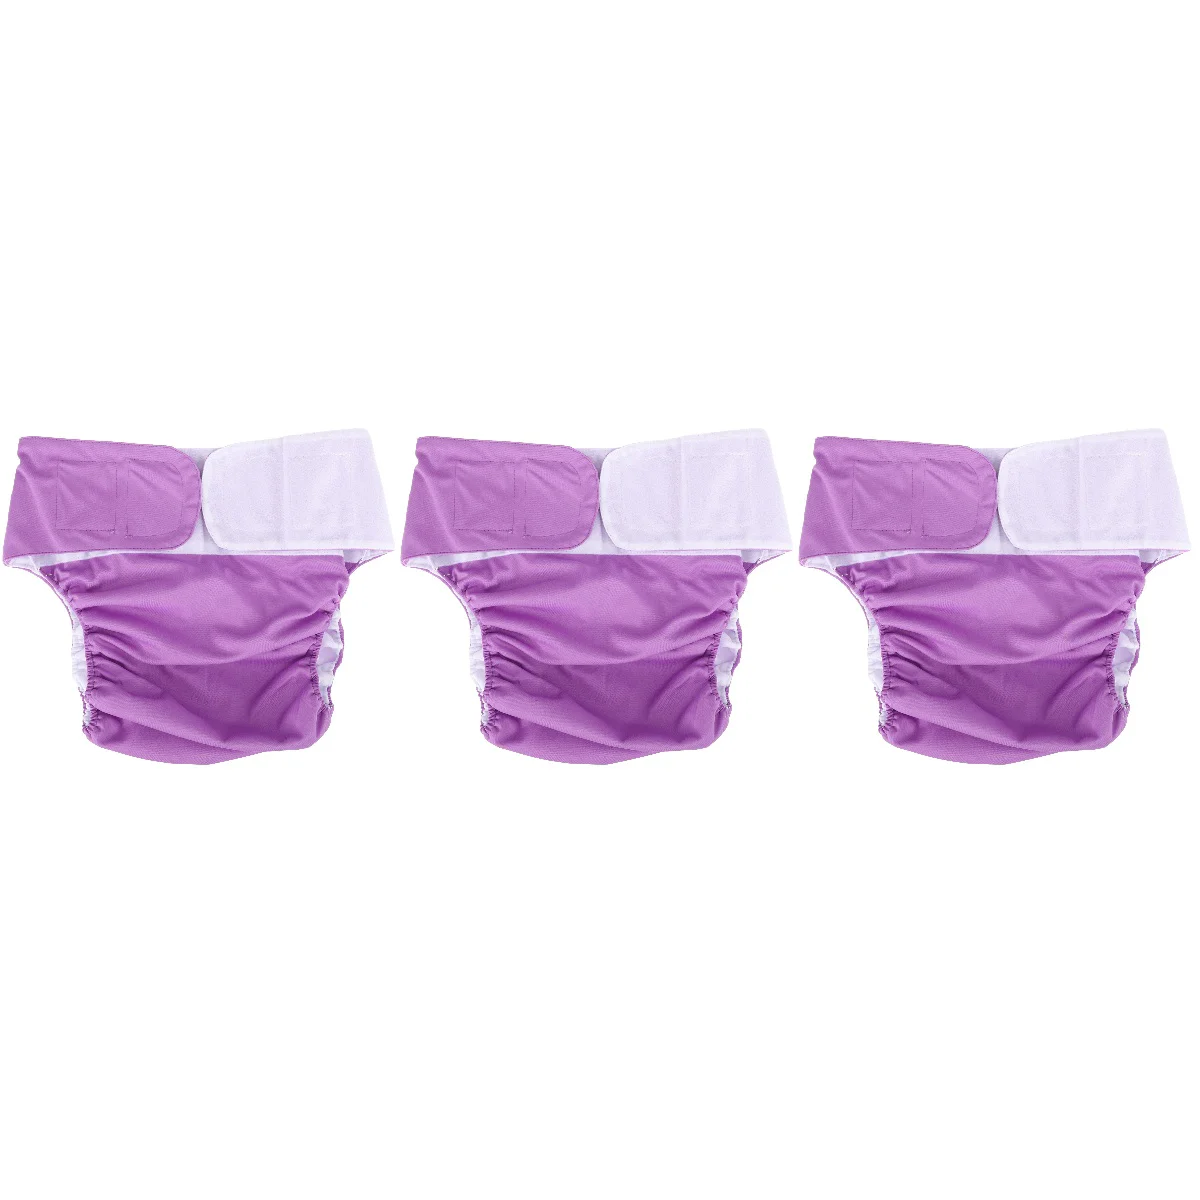 

Reusable Elderly Diaper Anti-leak Washable Adult Incontinence Nappy Urinal Pant Home Disable